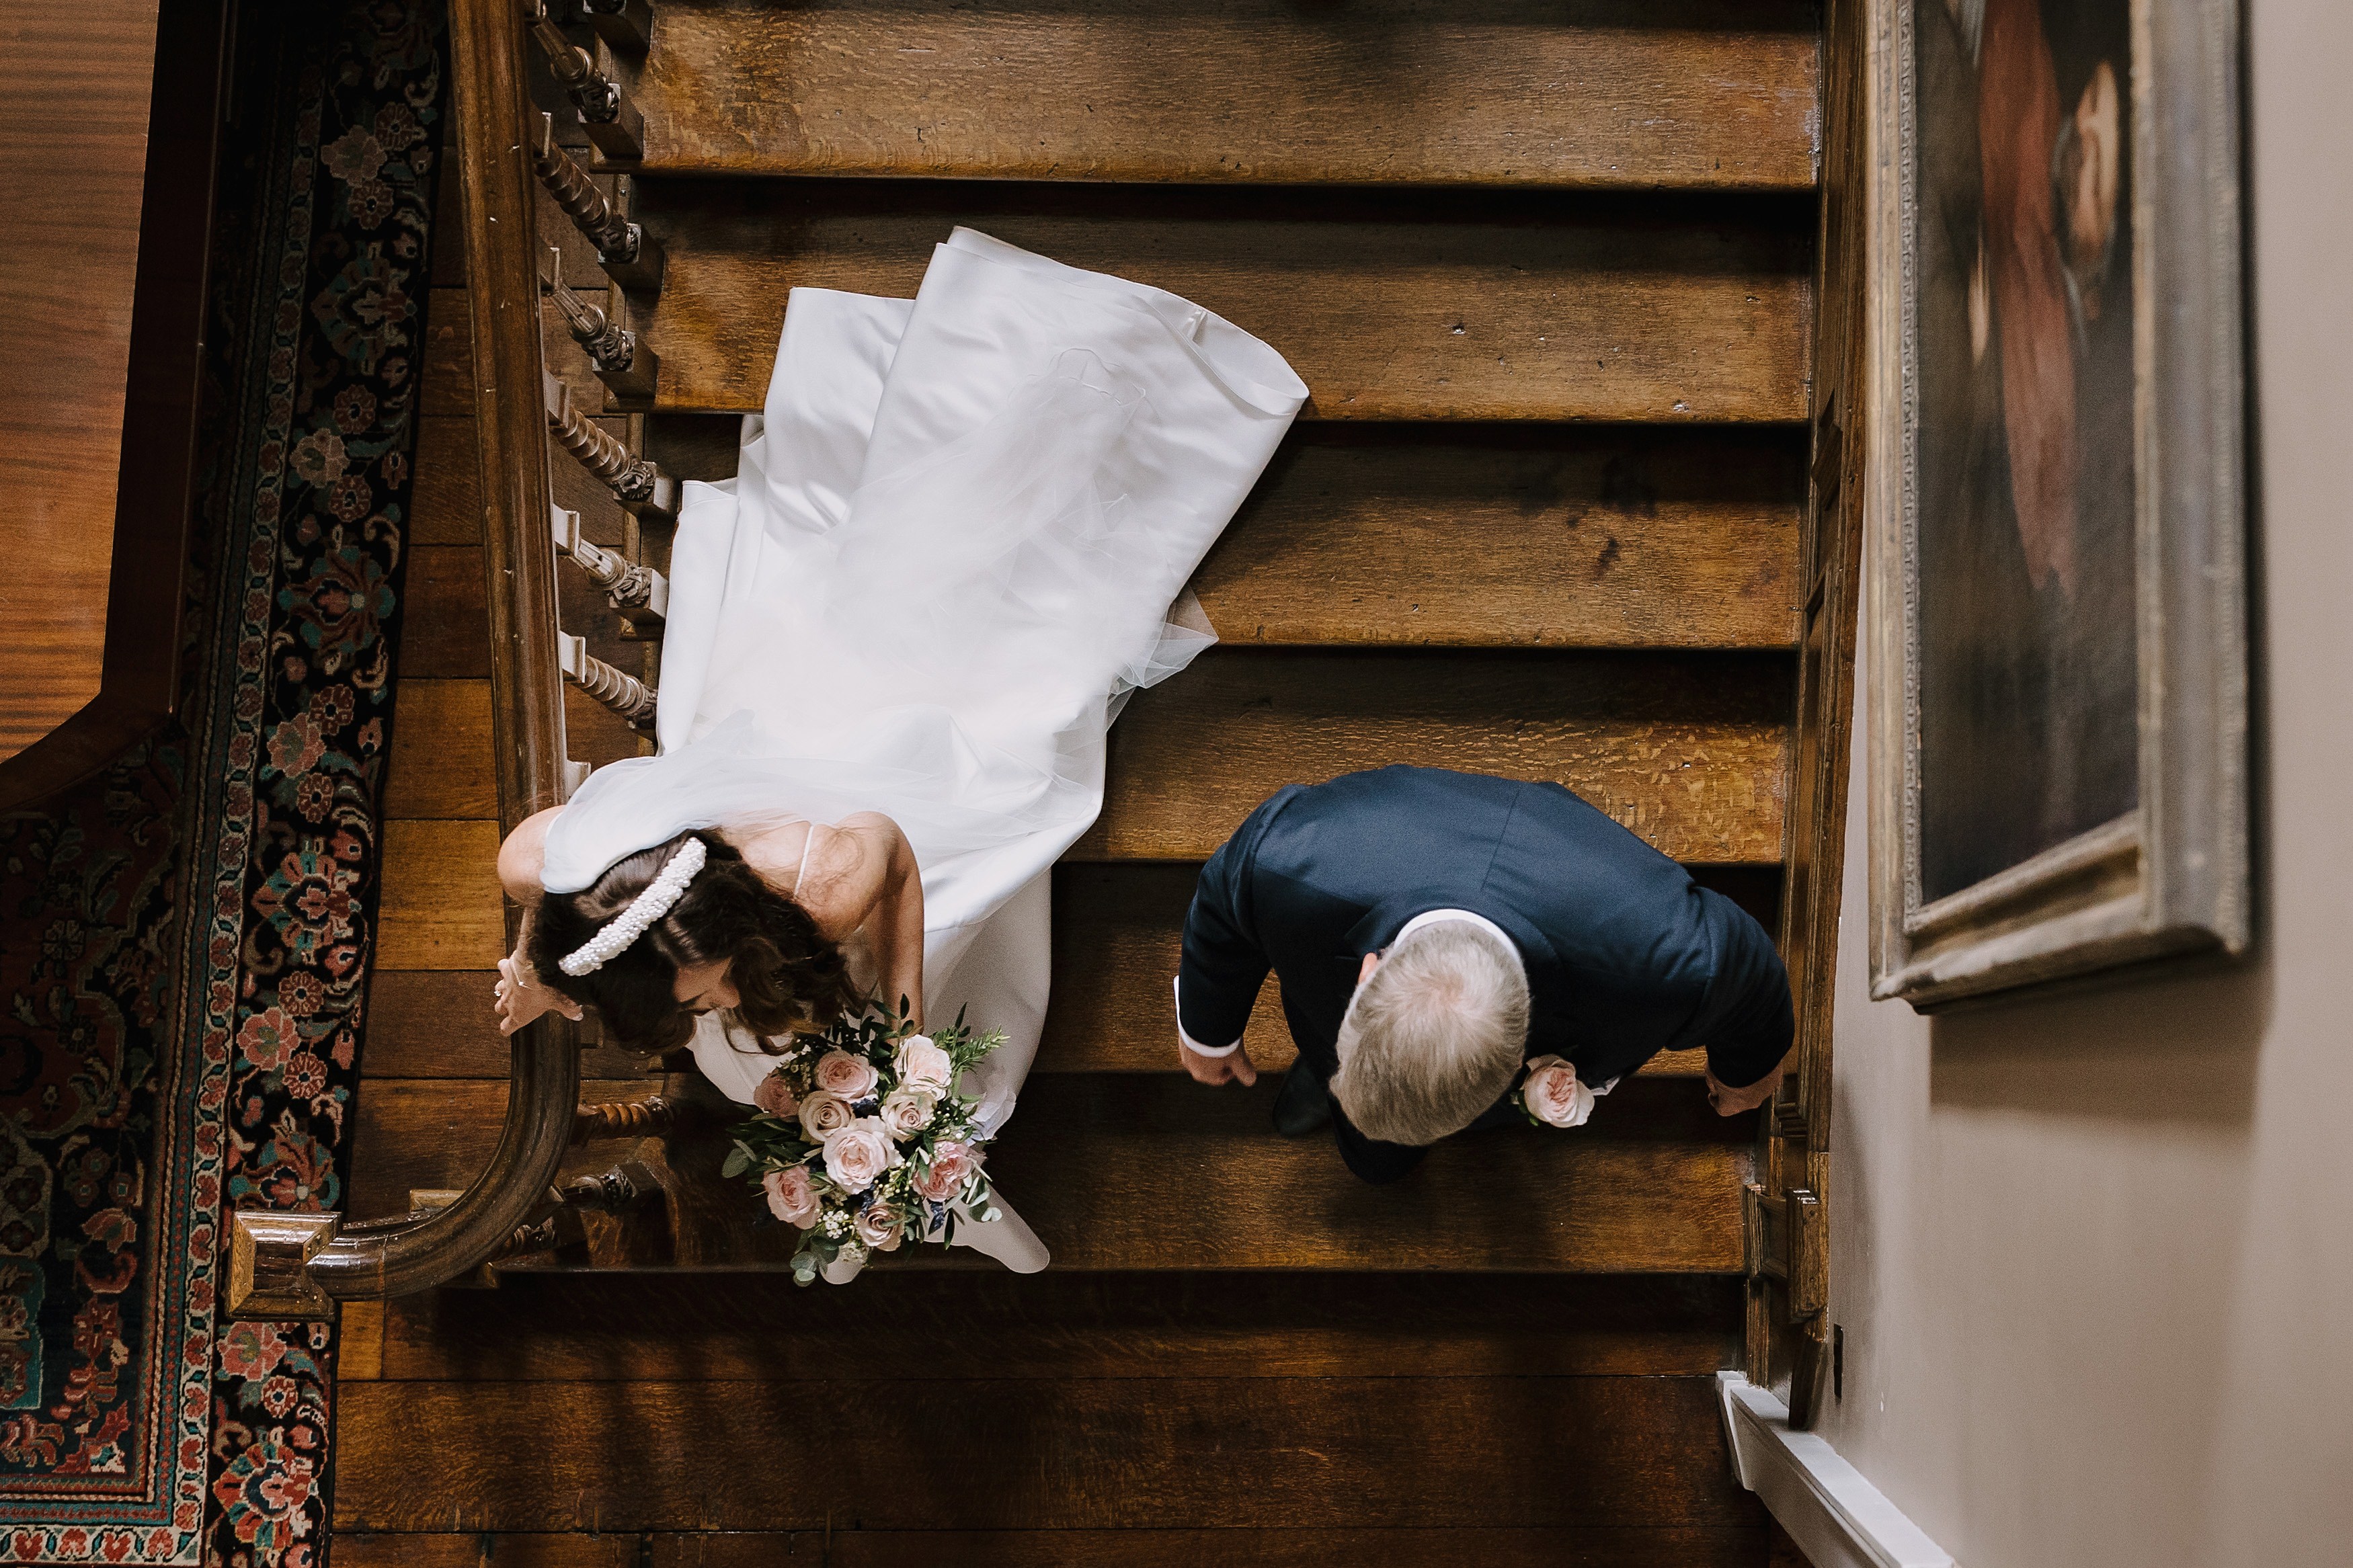 Photo from above showing a bride and father of the bride walking down the stairs together showing the train on her wedding dress